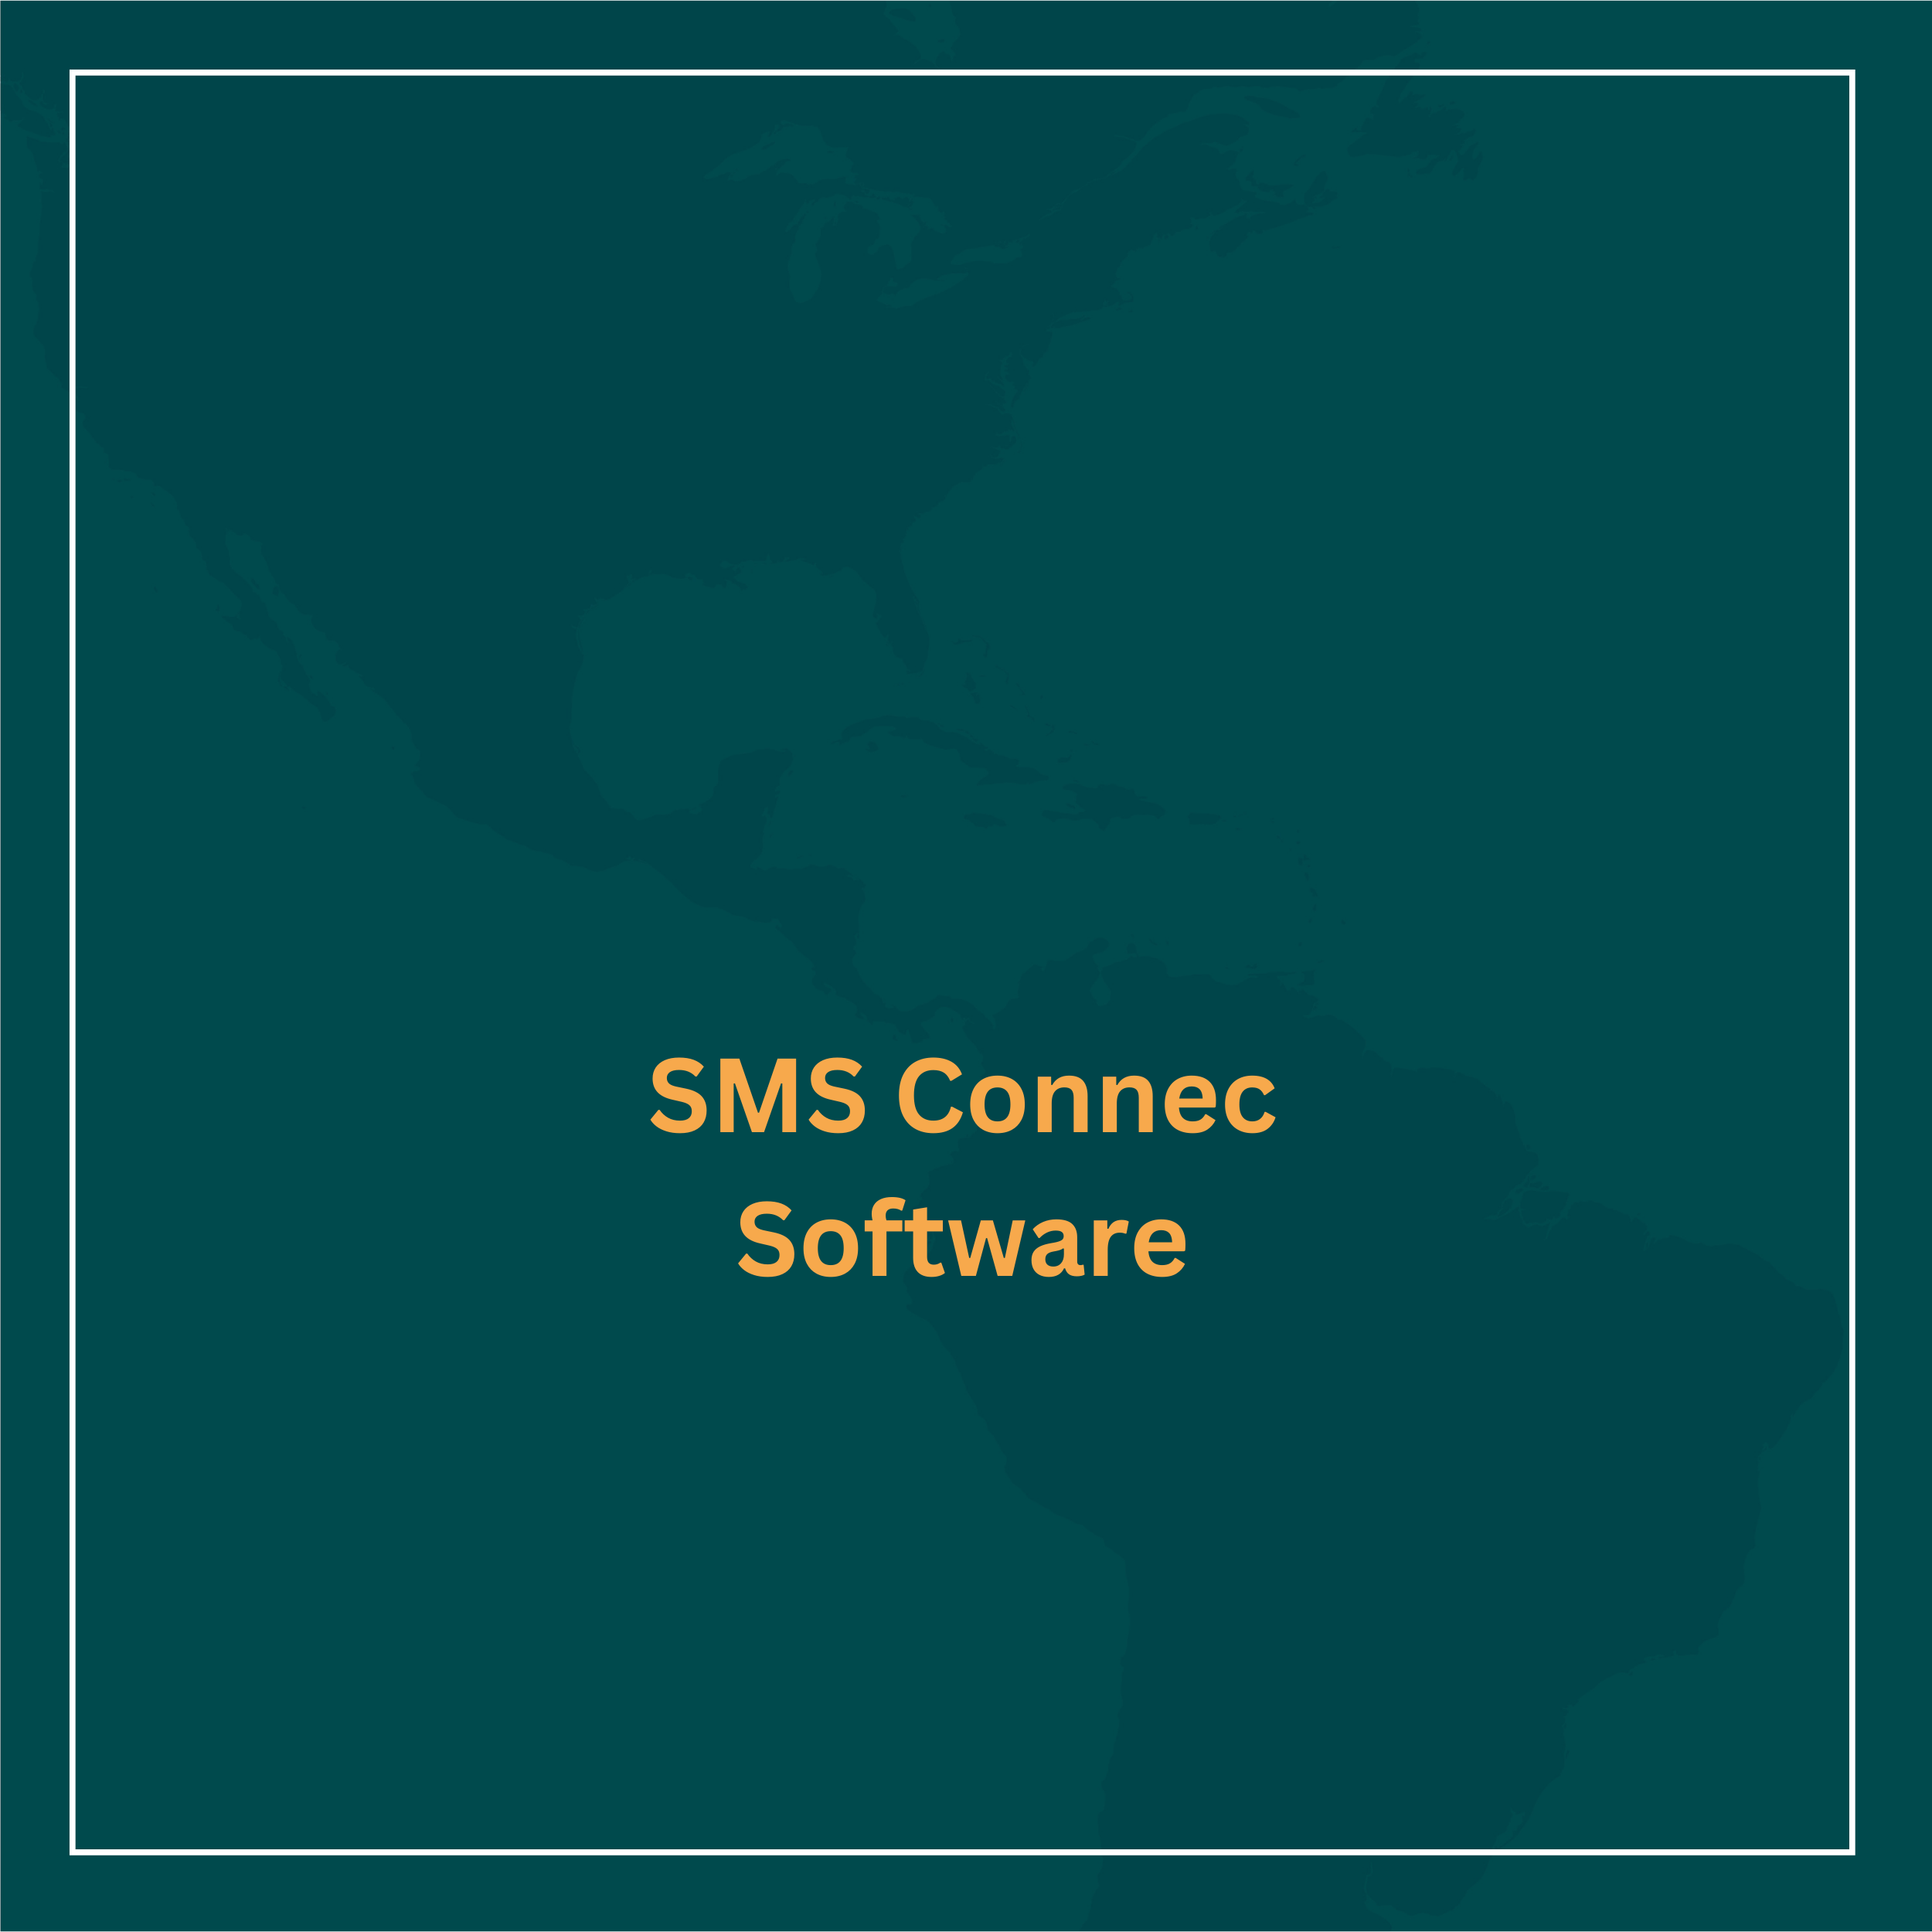 SMS Connec Software